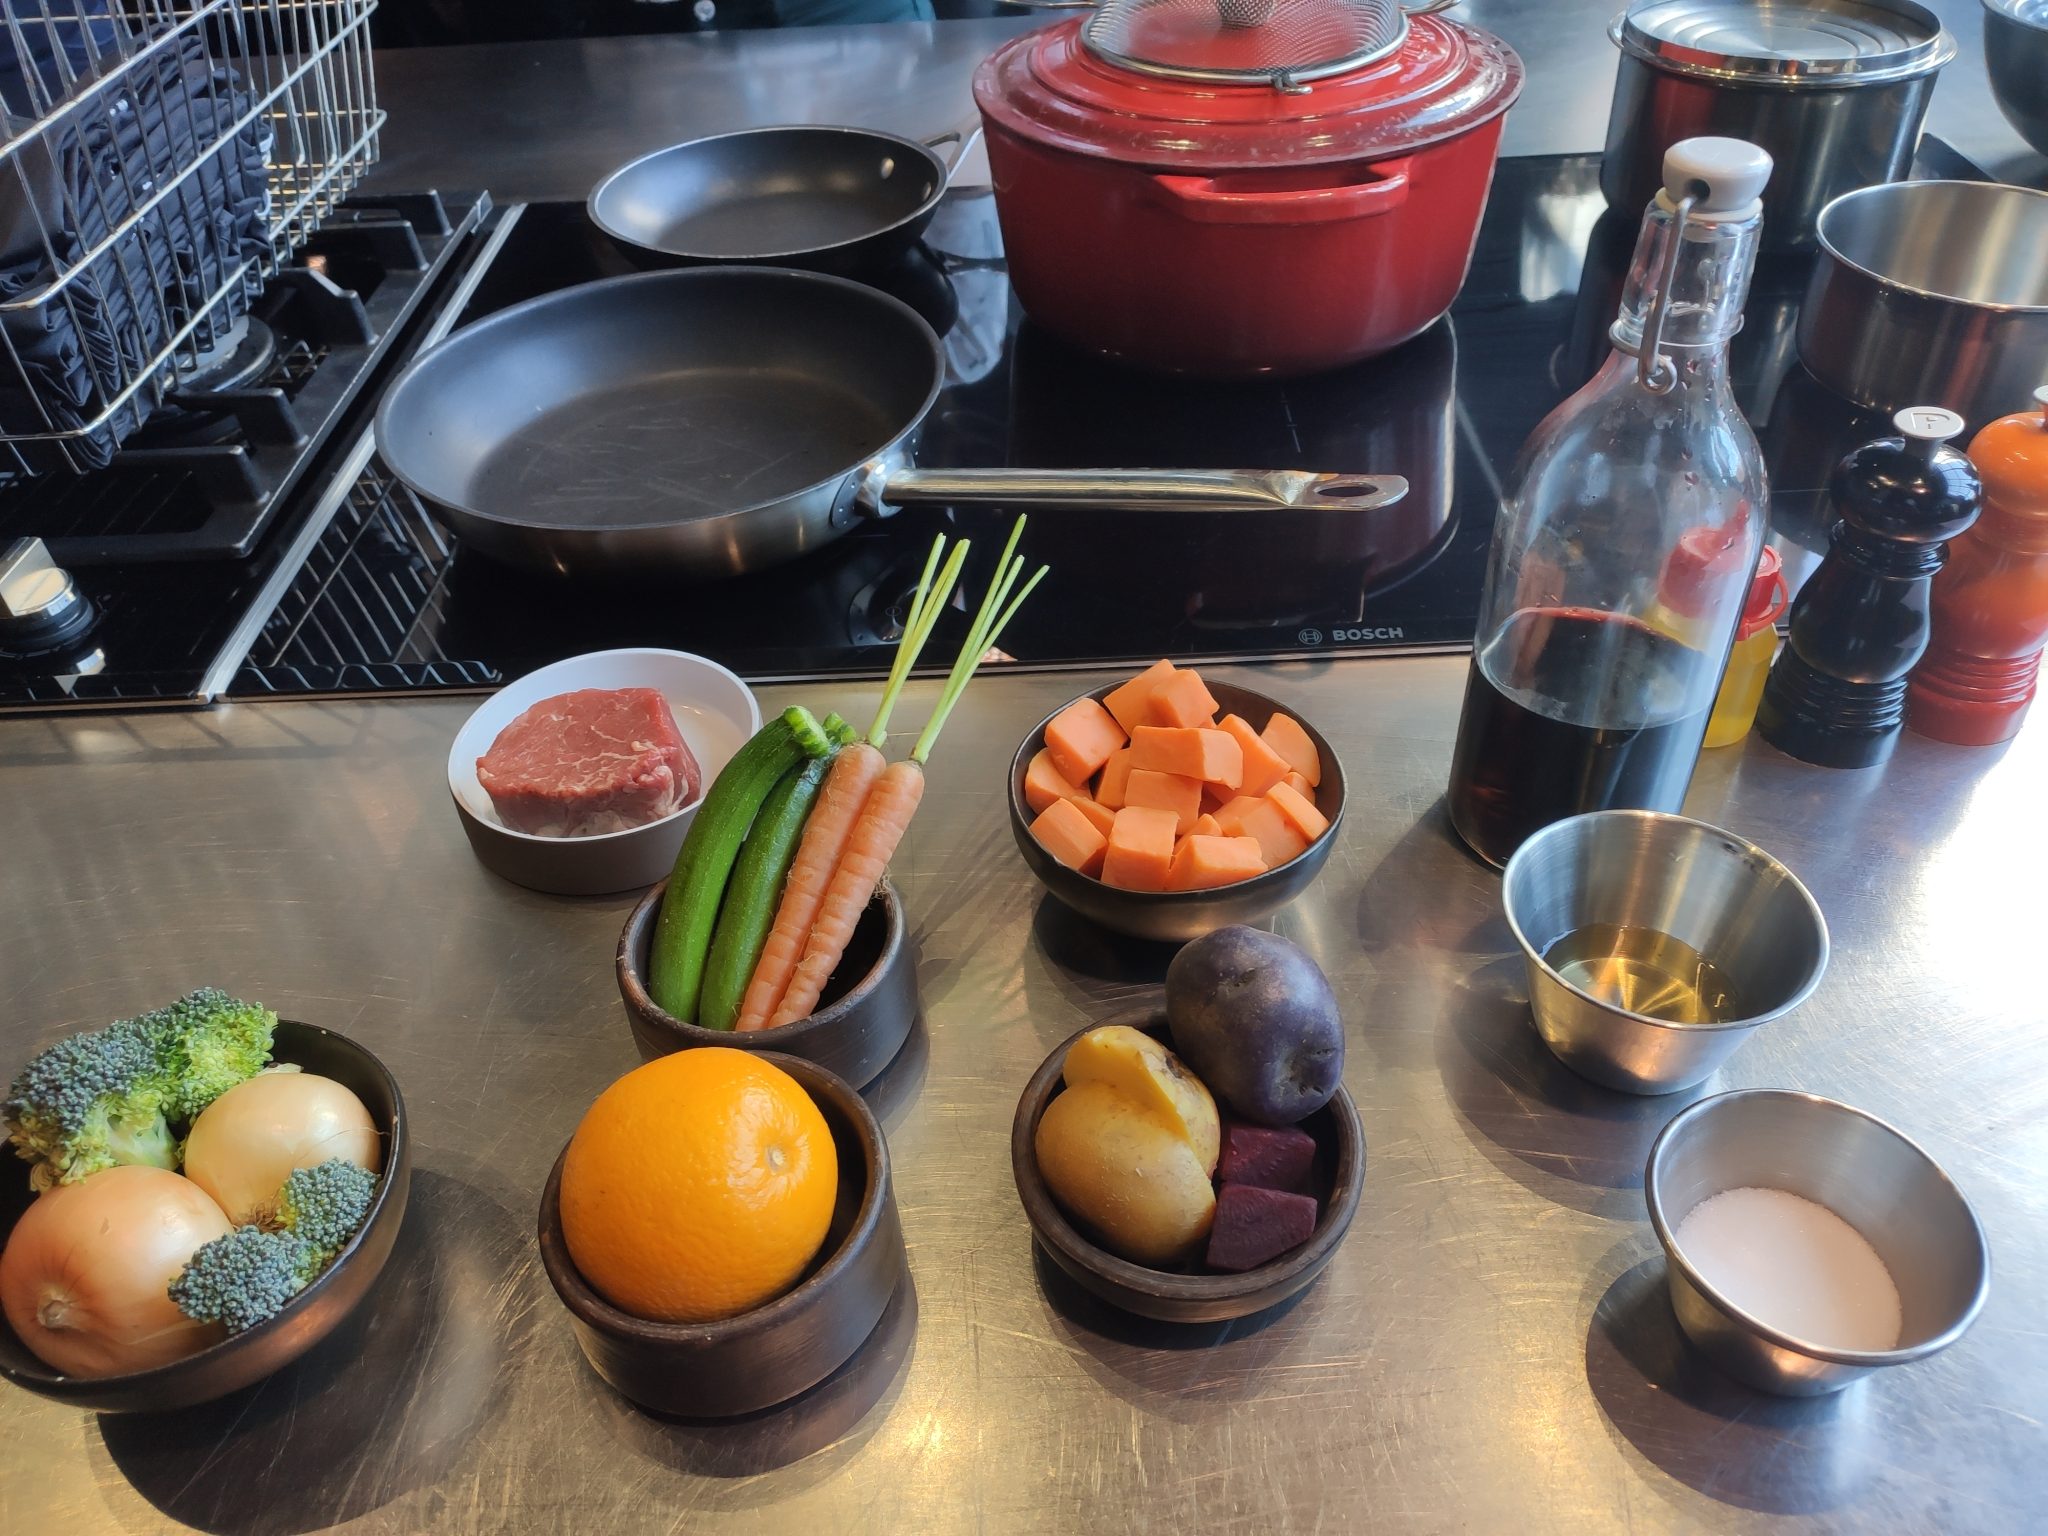 Some kitchen ingredients for a recipe such as orange, onion, potato, meata, carrots, broccoli, red wine, salt and olive oil. Also some kitchenware like two pans (samall and medium size) and a pot